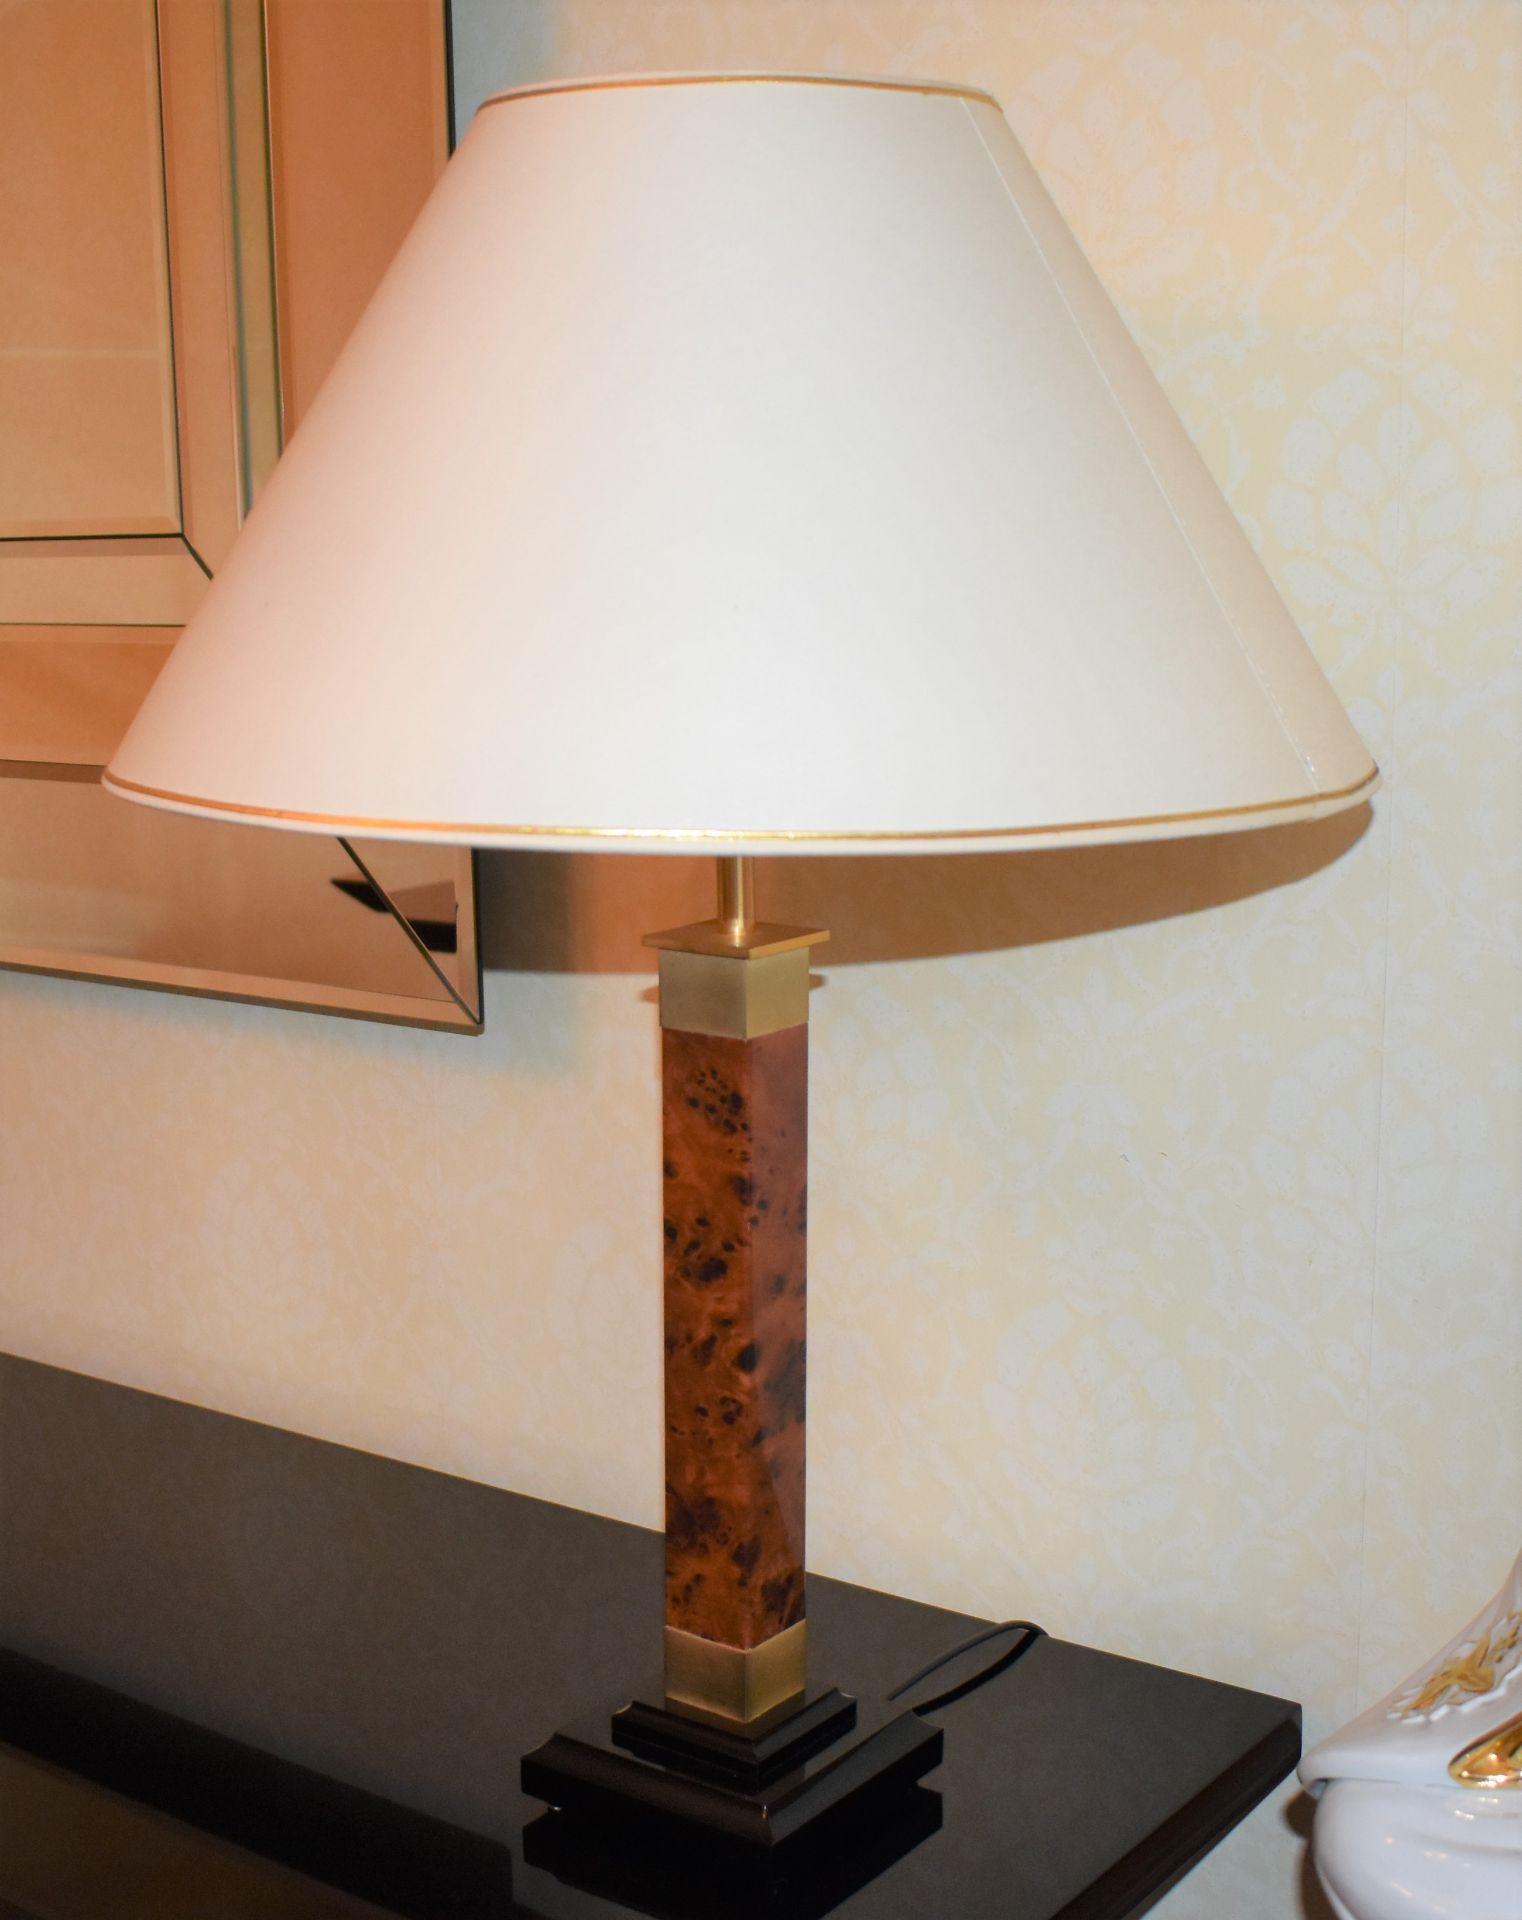 1 x Pair of Table Lamps With Burr Walnut Pedestals and Cream Shades - Features Inline On/Off - Image 2 of 7